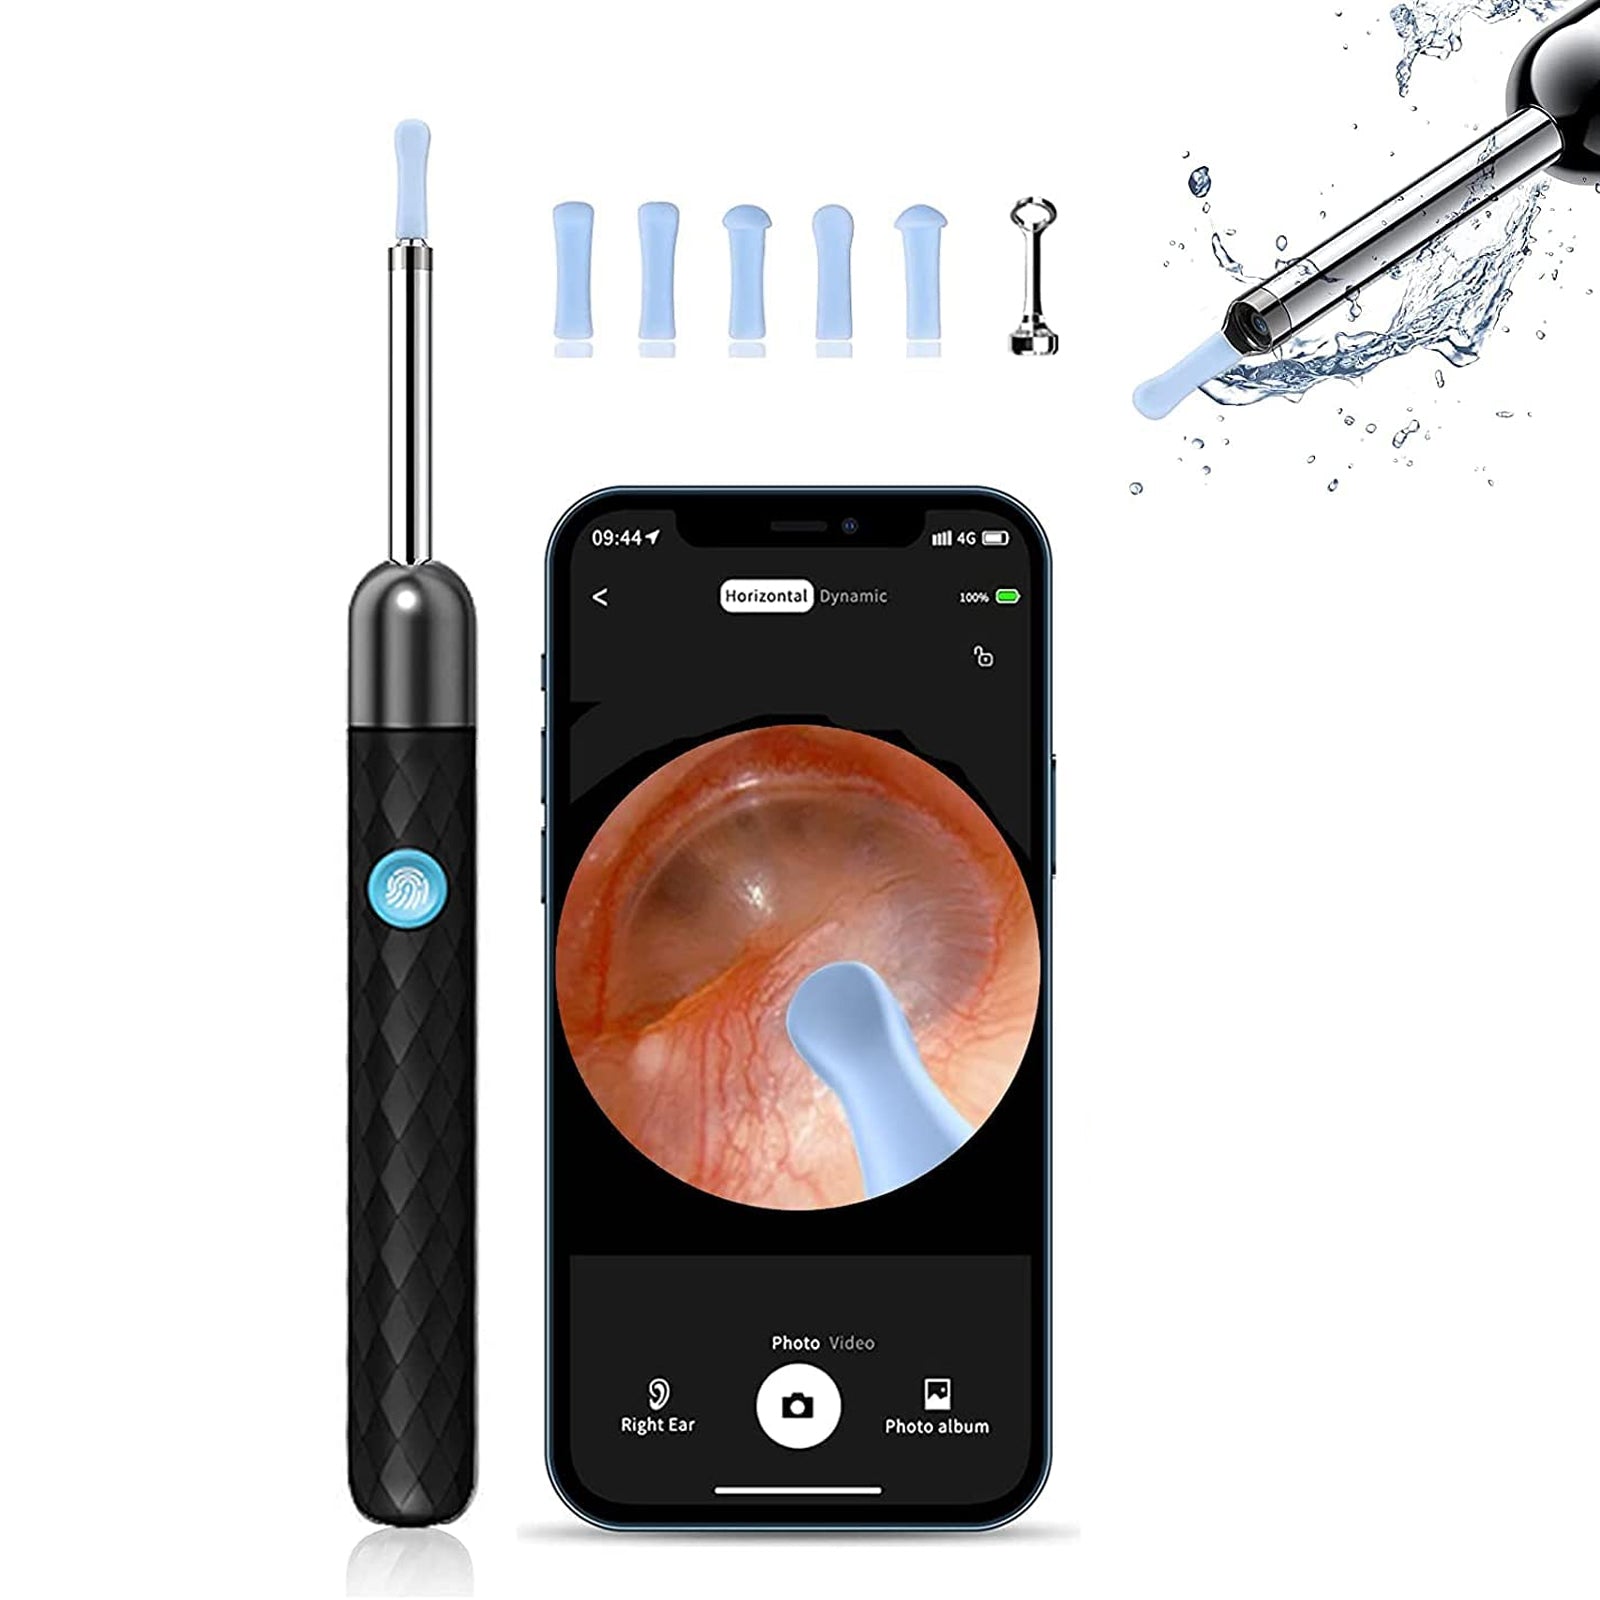 Verilux Ear Wax Remover Tool Kit Camera 6-Axis Gyroscope Ear Cleaner Tool with 6 Ear Spoons & 1 Acne Pin Ear Wax Cleaner Machine 1080P 4mm Otoscope Lens Ear Camera Cleaner for Cleaning Spade